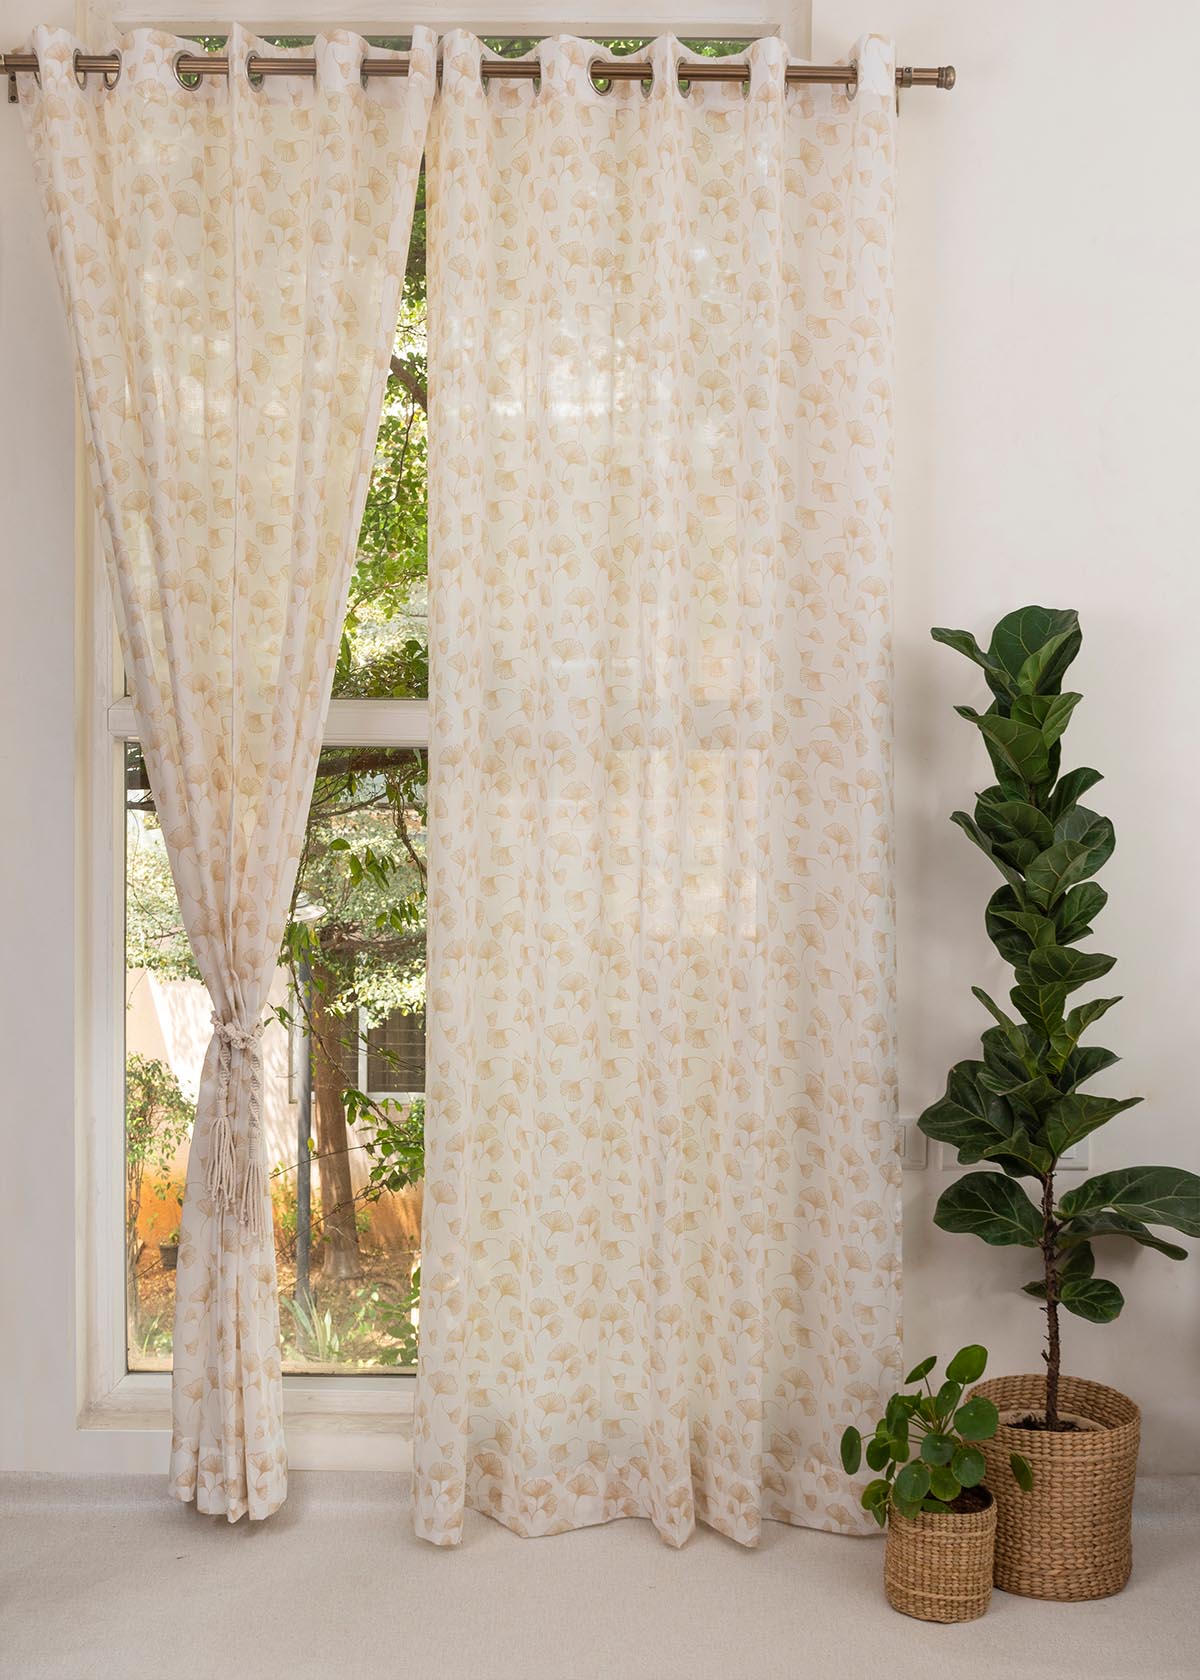 Gingko 100% Customizable Cotton sheer floral curtain for living room -  Light filtering - Multicolor